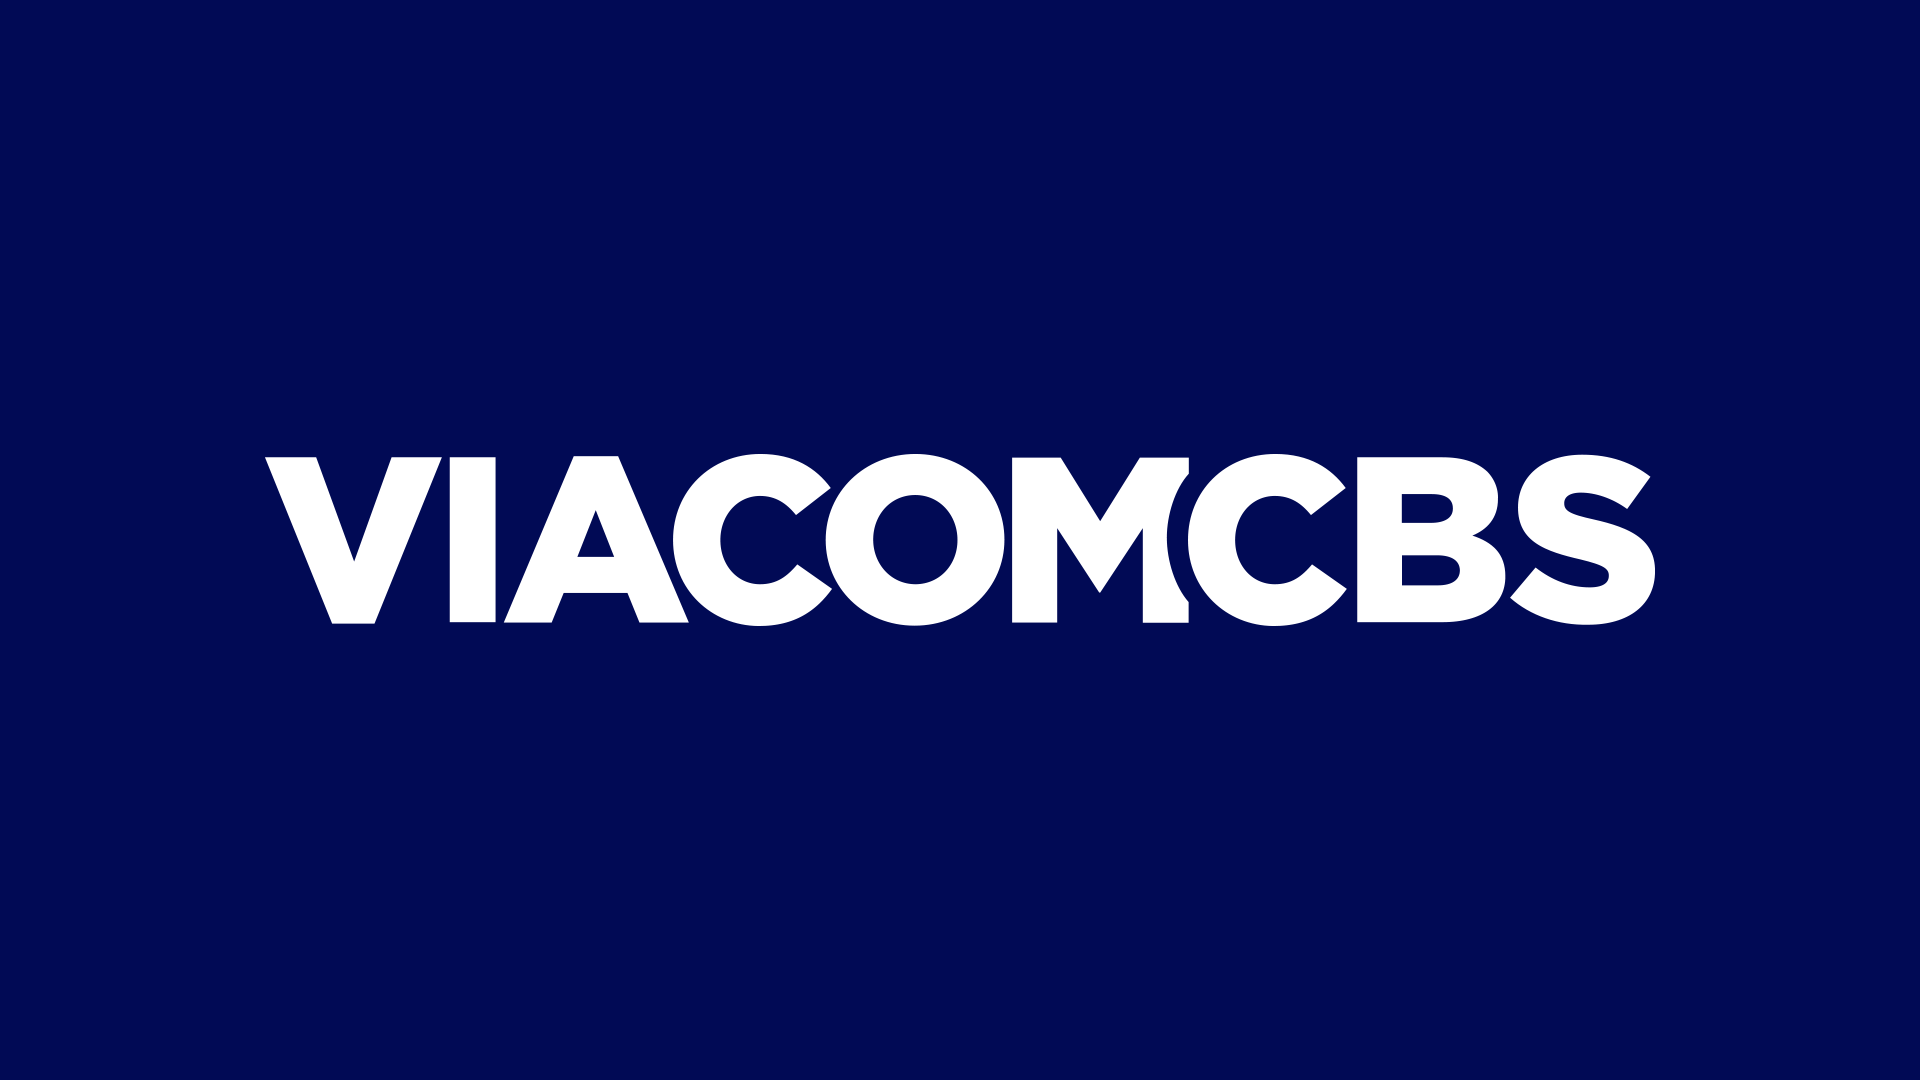 The European VOD Coalition welcomes ViacomCBS as a new member